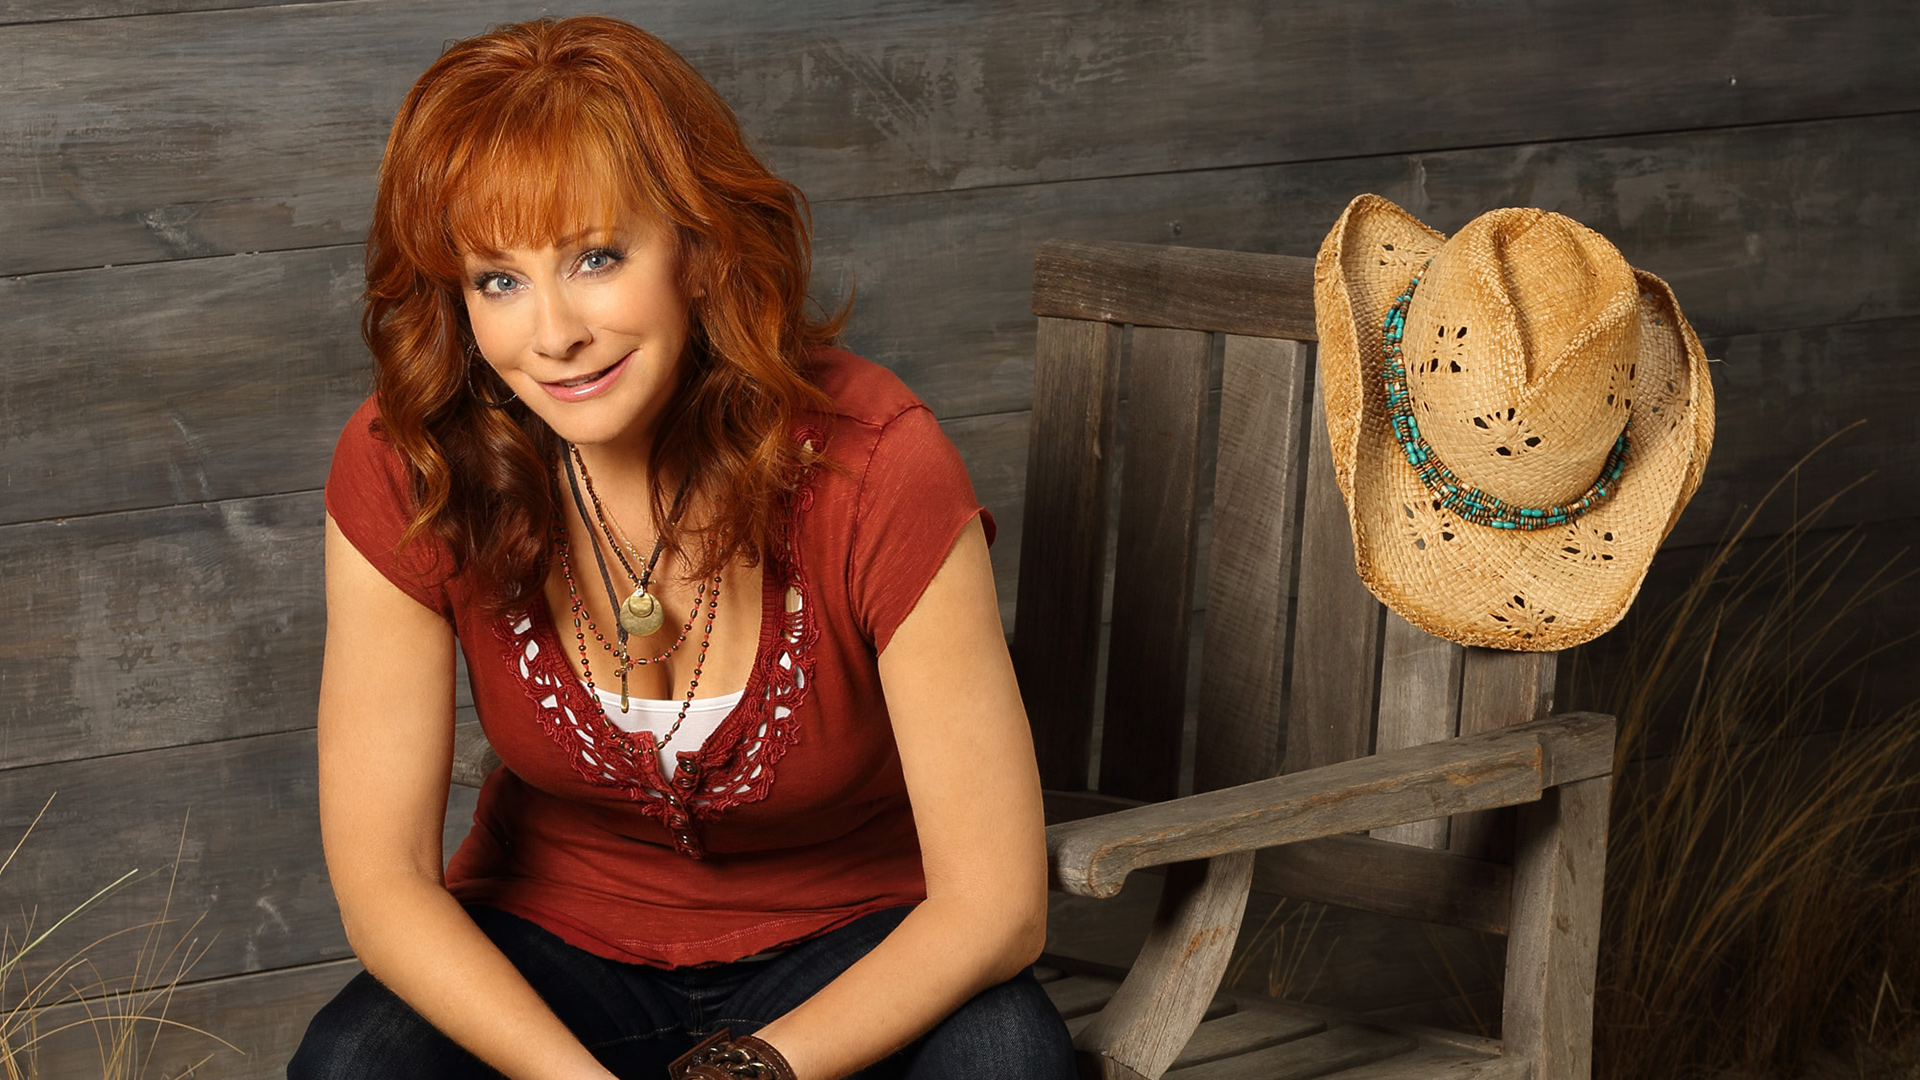 Reba S Busy Year A Return To Television New Album In The Works